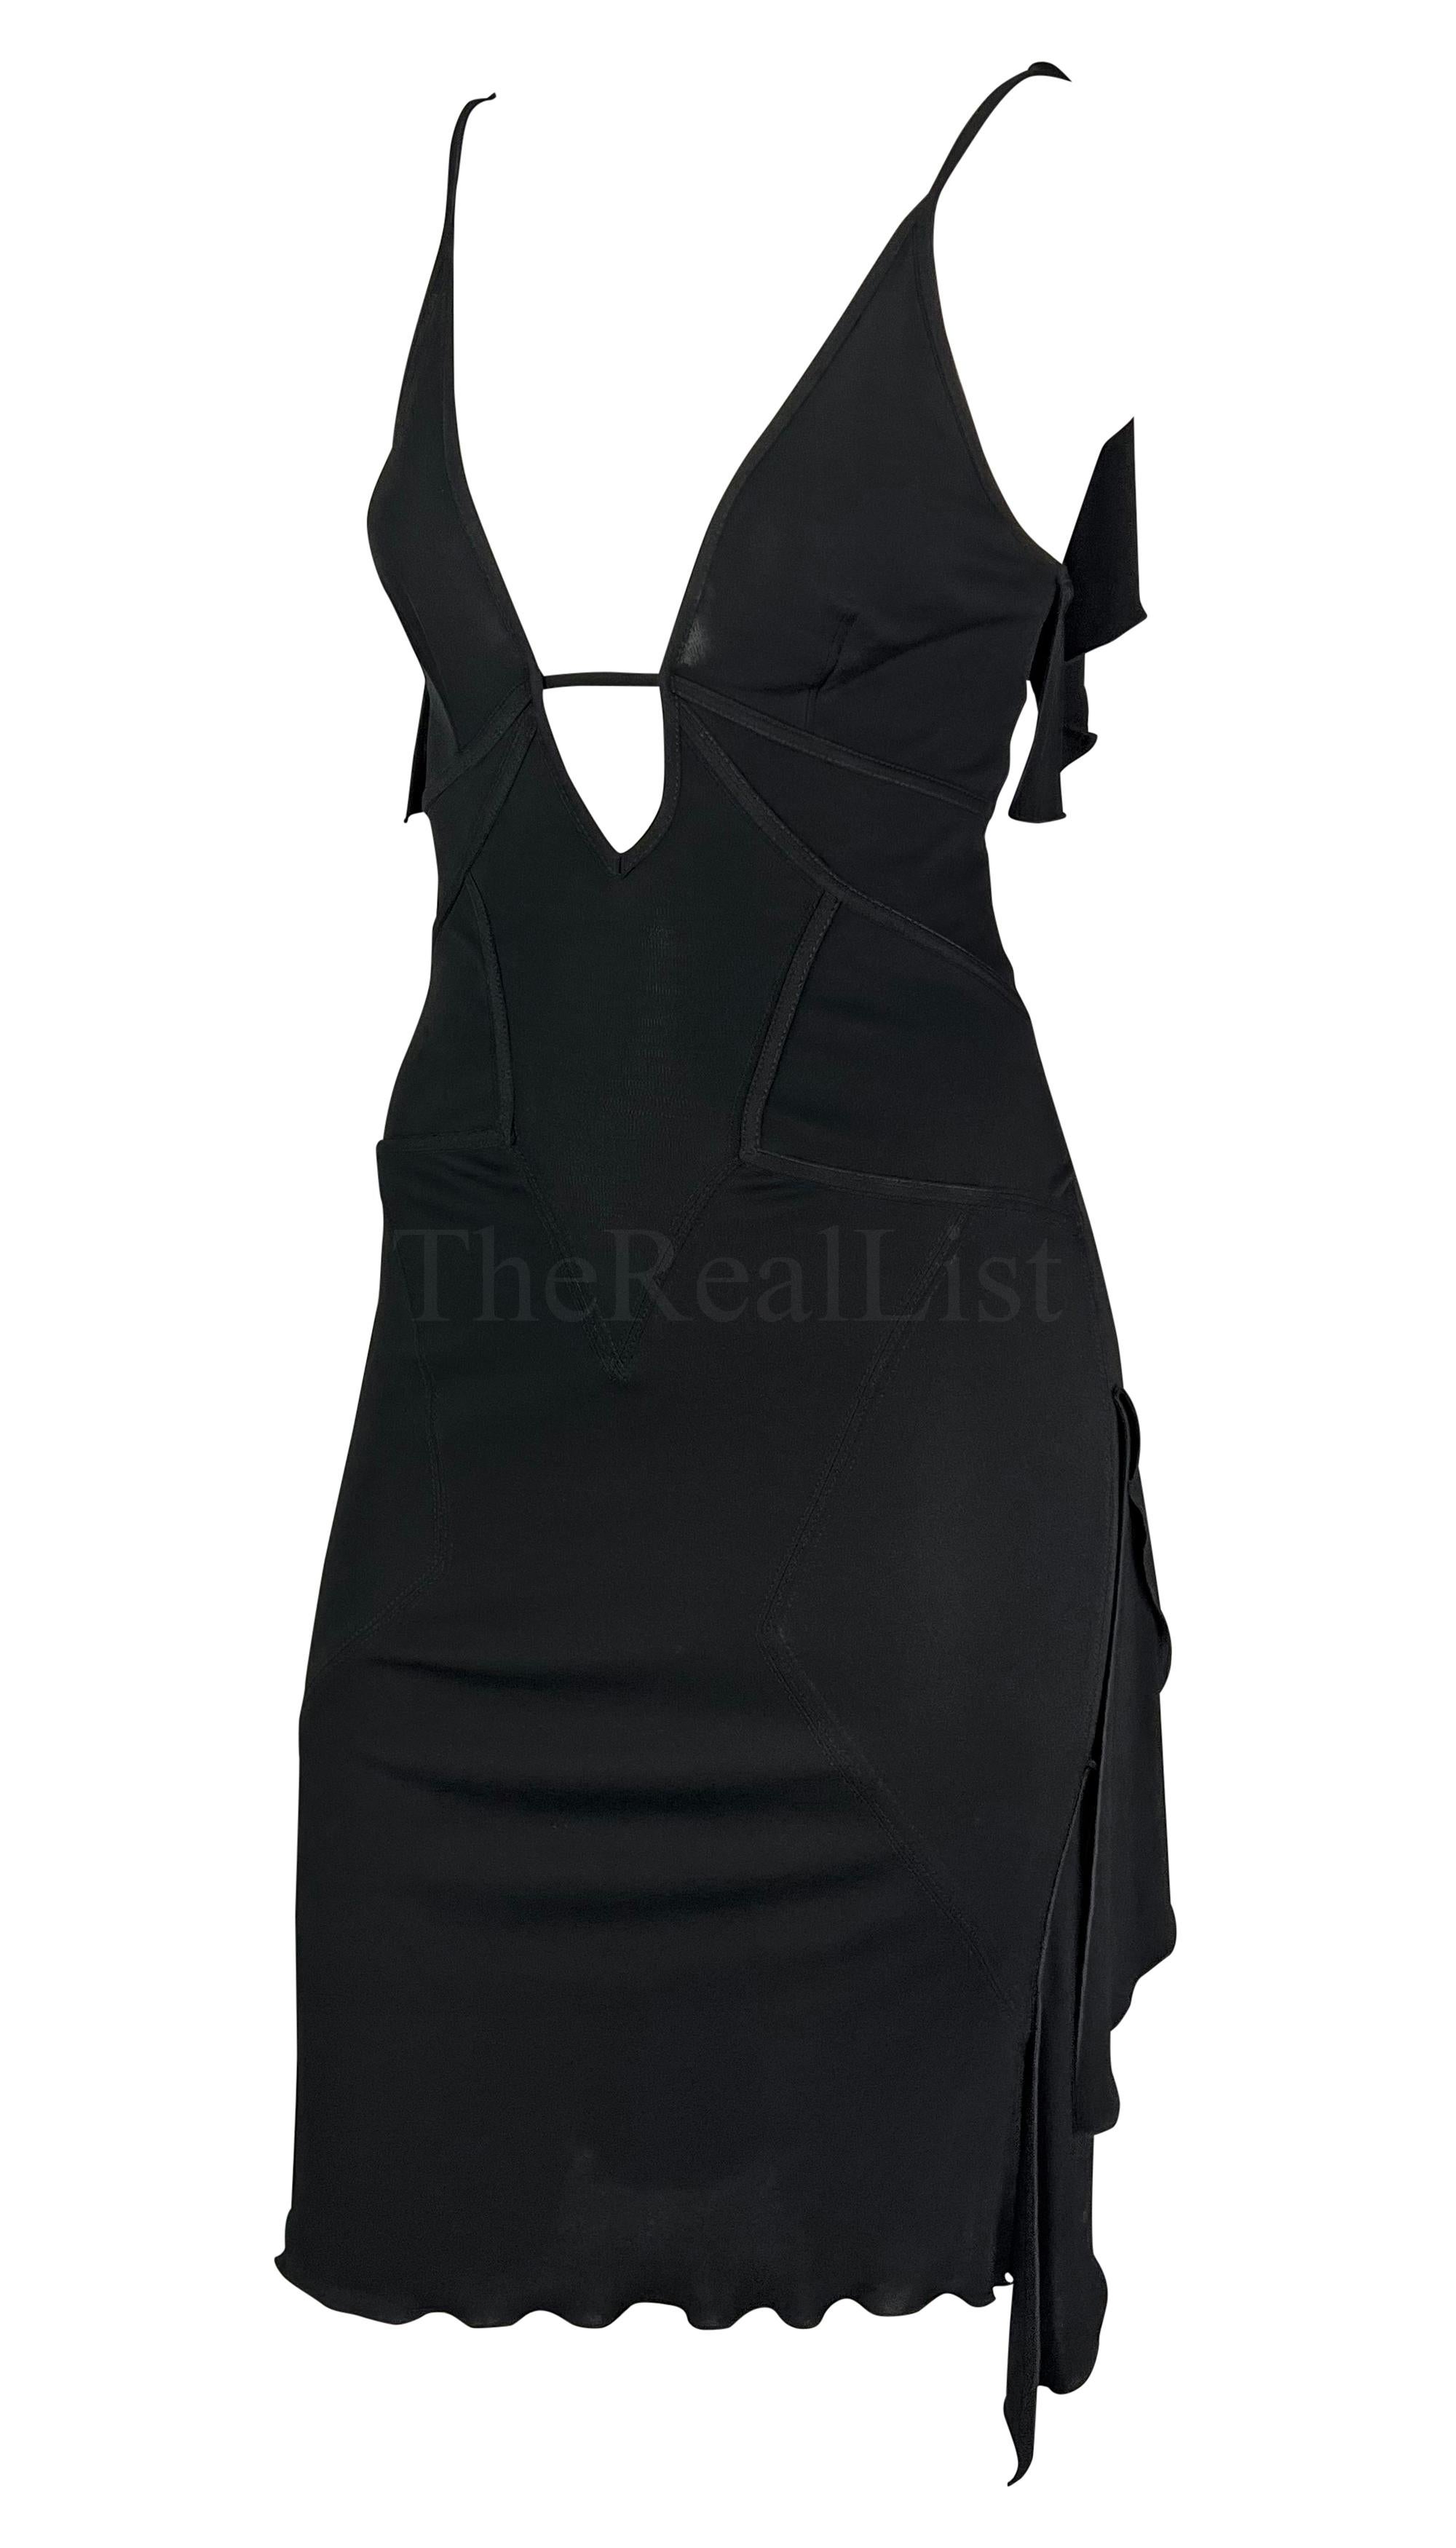 Presenting a chic black ruffle Gucci slip dress, designed by Tom Ford. From 2003, a plunging neckline, spaghetti straps, and an alluring exposed back meet artfully placed straps, creating a perfect silhouette. The dress is made complete with draped